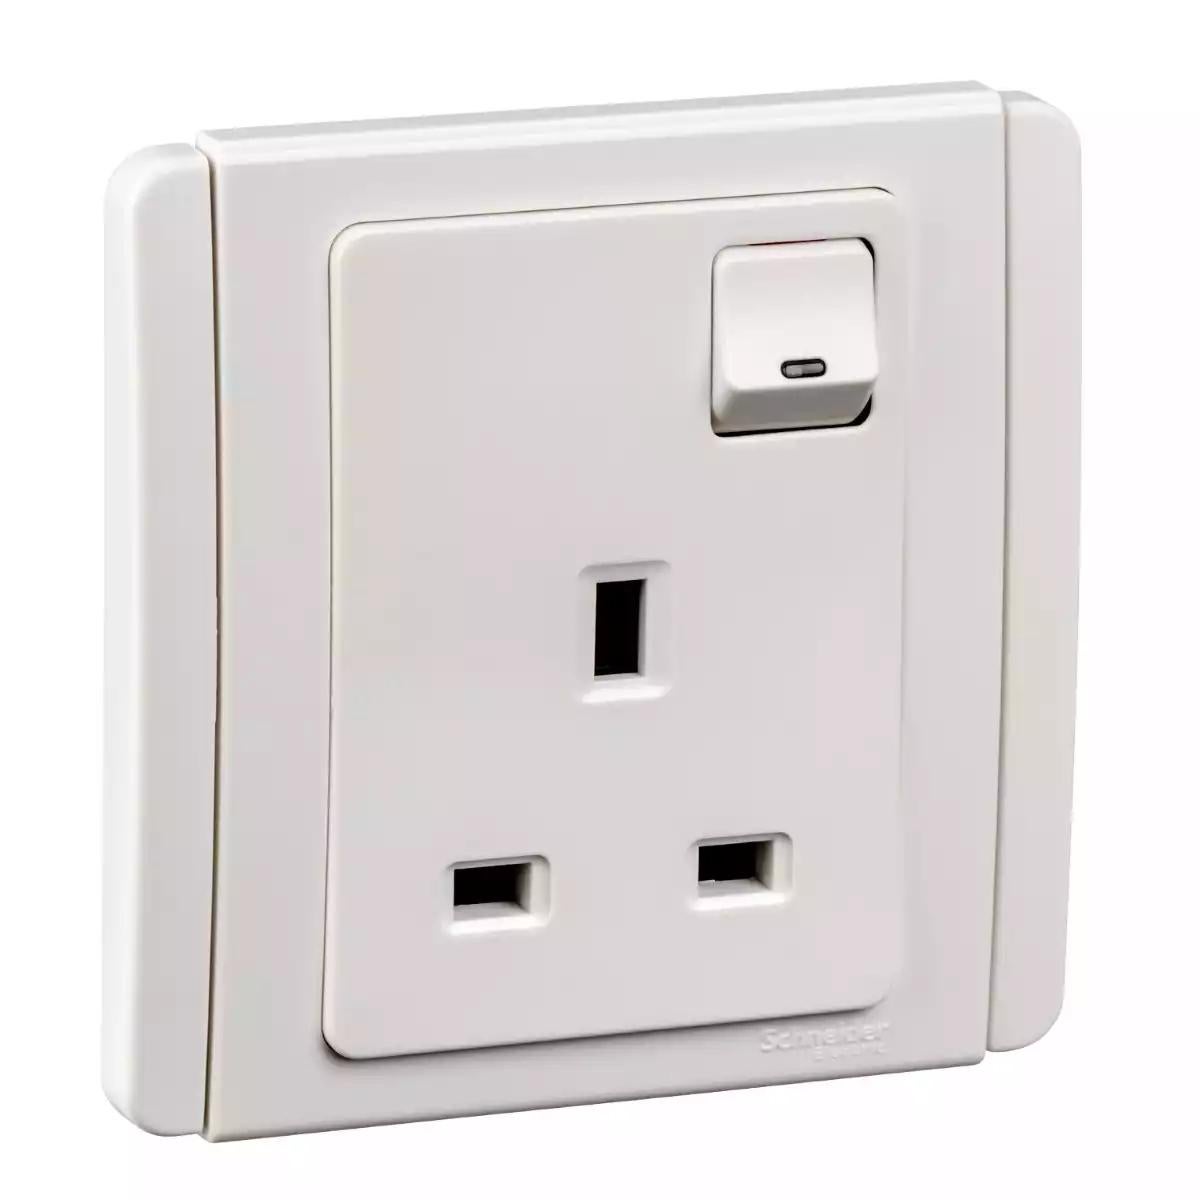 Schneider Electric 13A 3 Pin Switched Socket Outlet with White LED